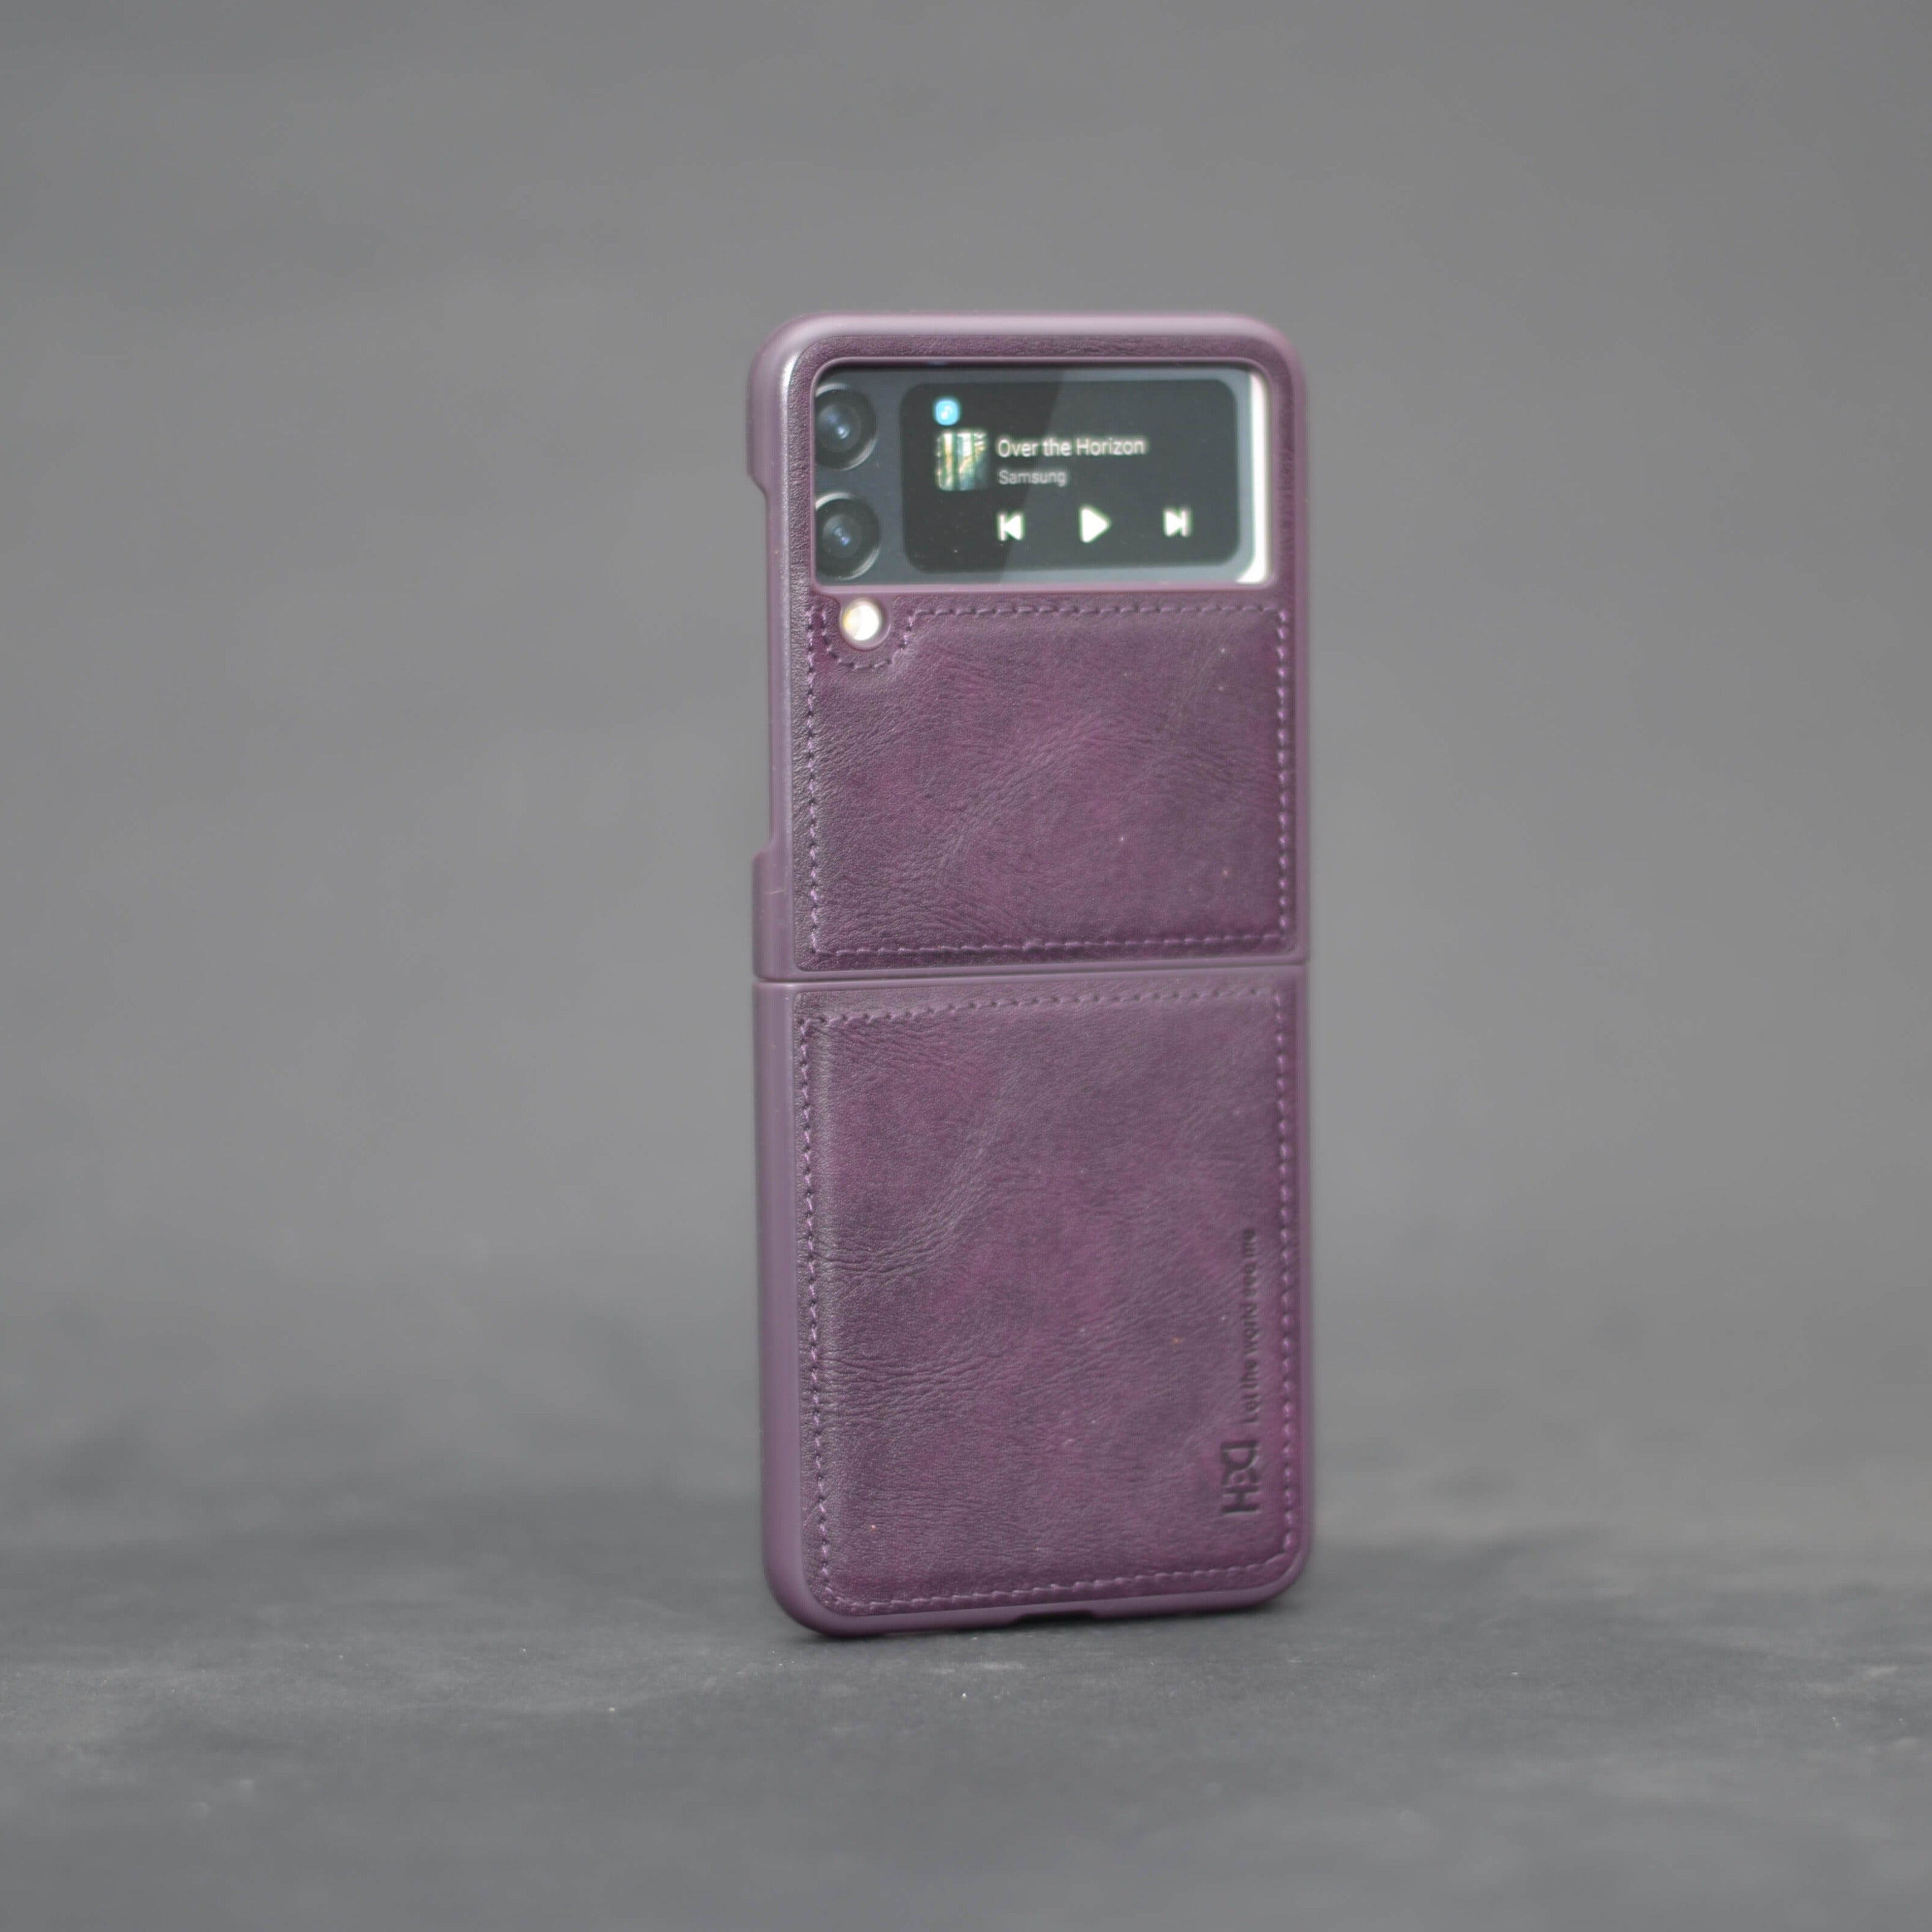 For Samsung Flip 3 Nillkin Qin Series Leather case